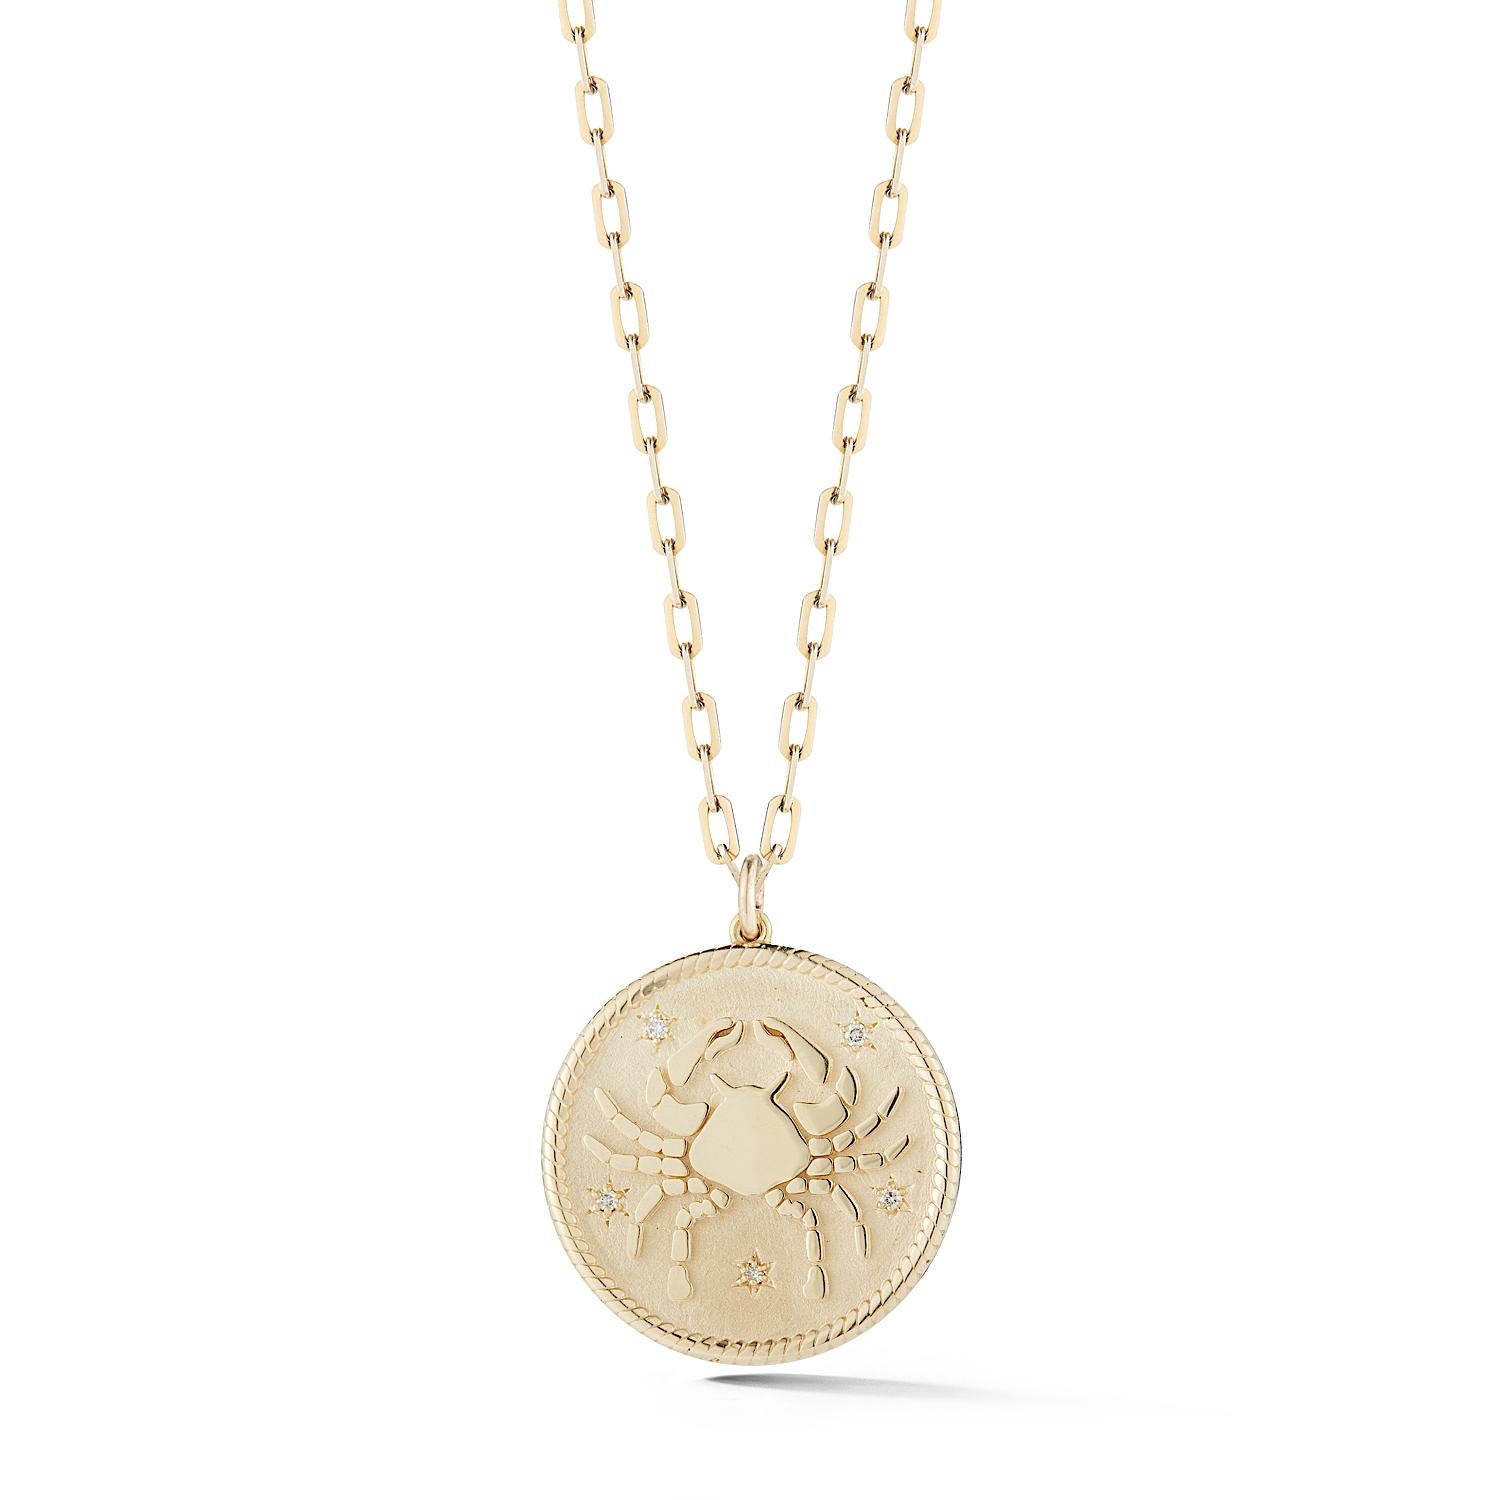 Garland Collection Diamond and Gold Virgo Zodiac Medallion For Sale 9